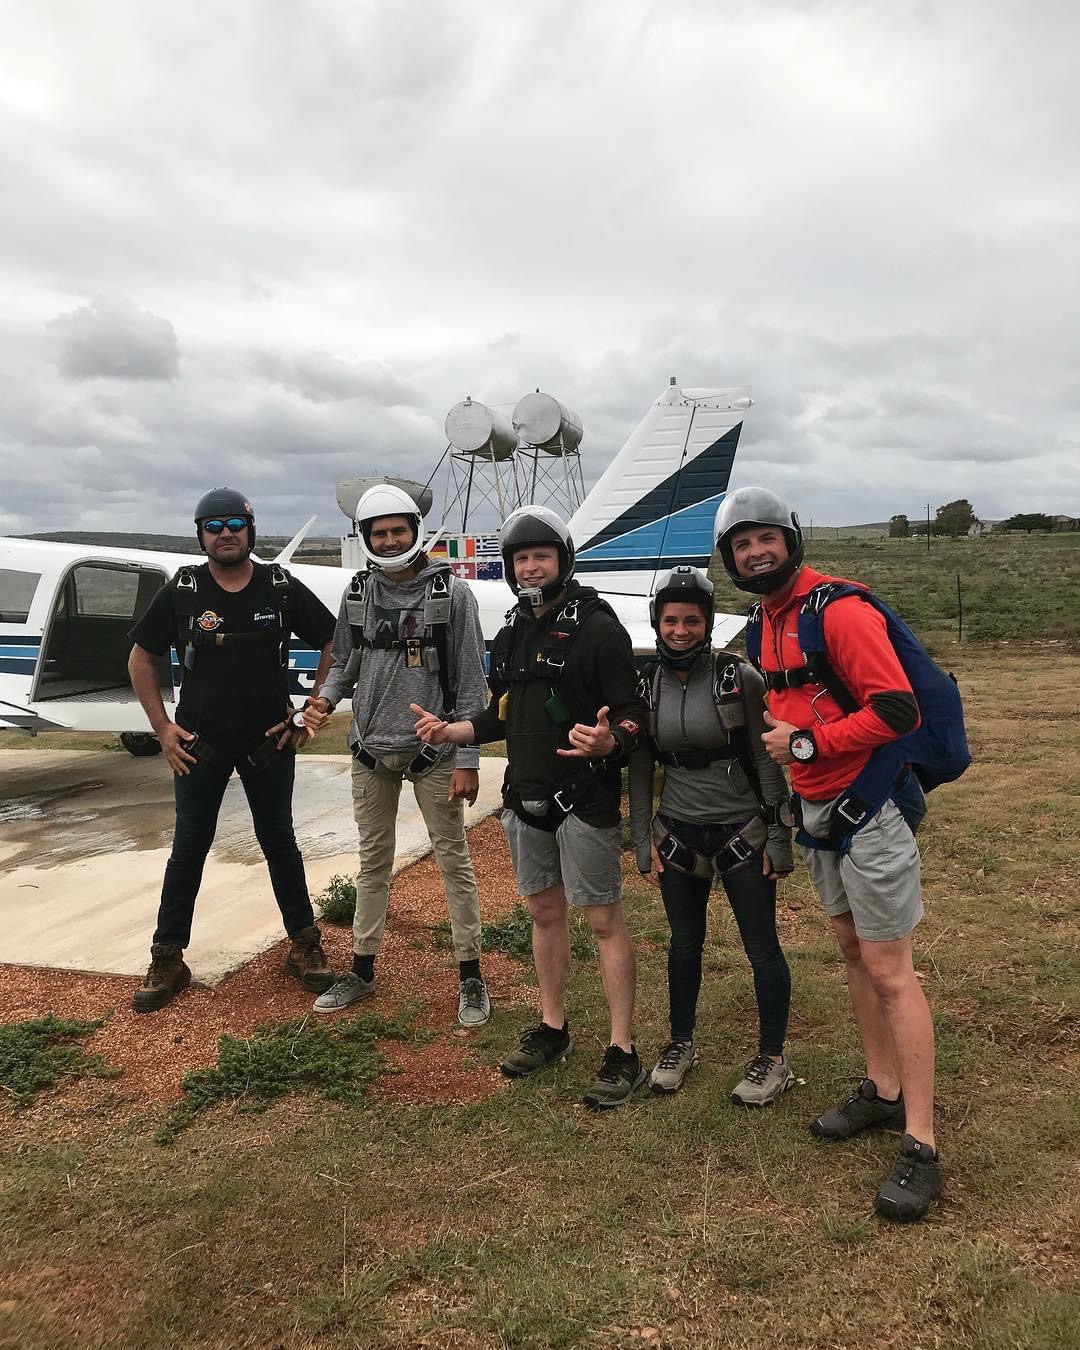 Group of professional skydivers about to take off in South Africa